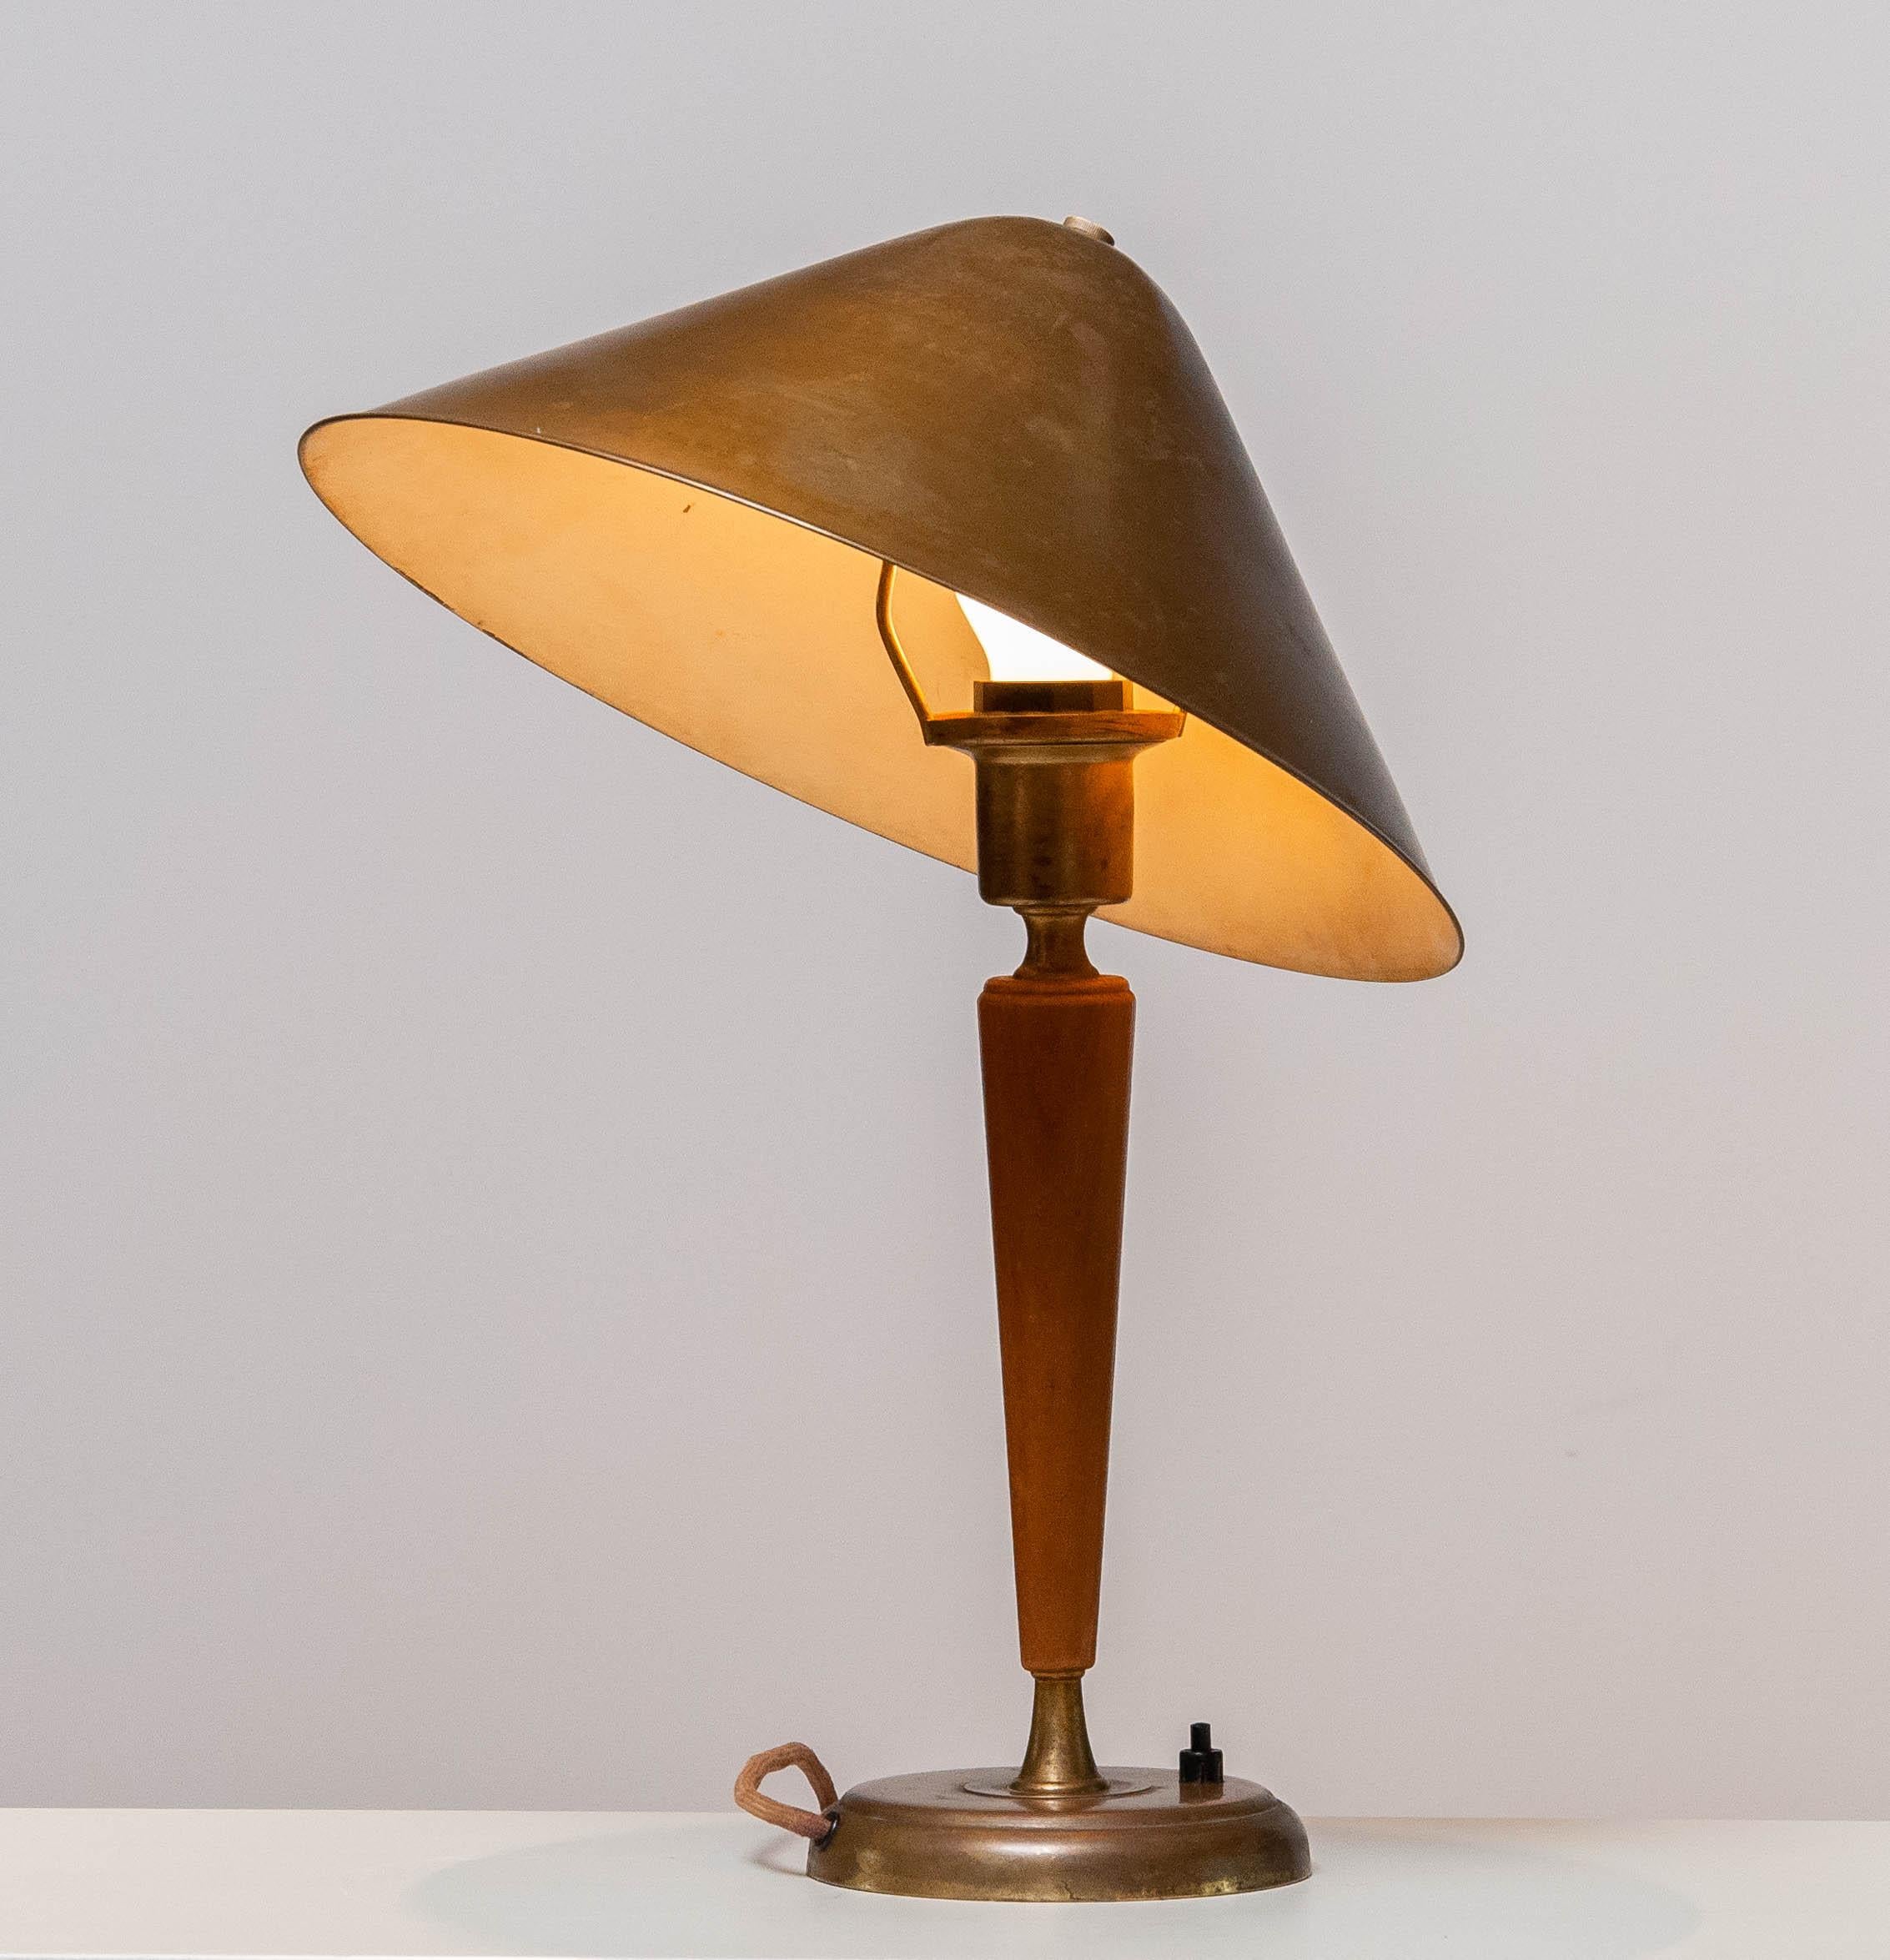 1940's Brass and Elm Table Lamp Designed by Harald Elof Notini for Böhlmarks In Good Condition For Sale In Silvolde, Gelderland